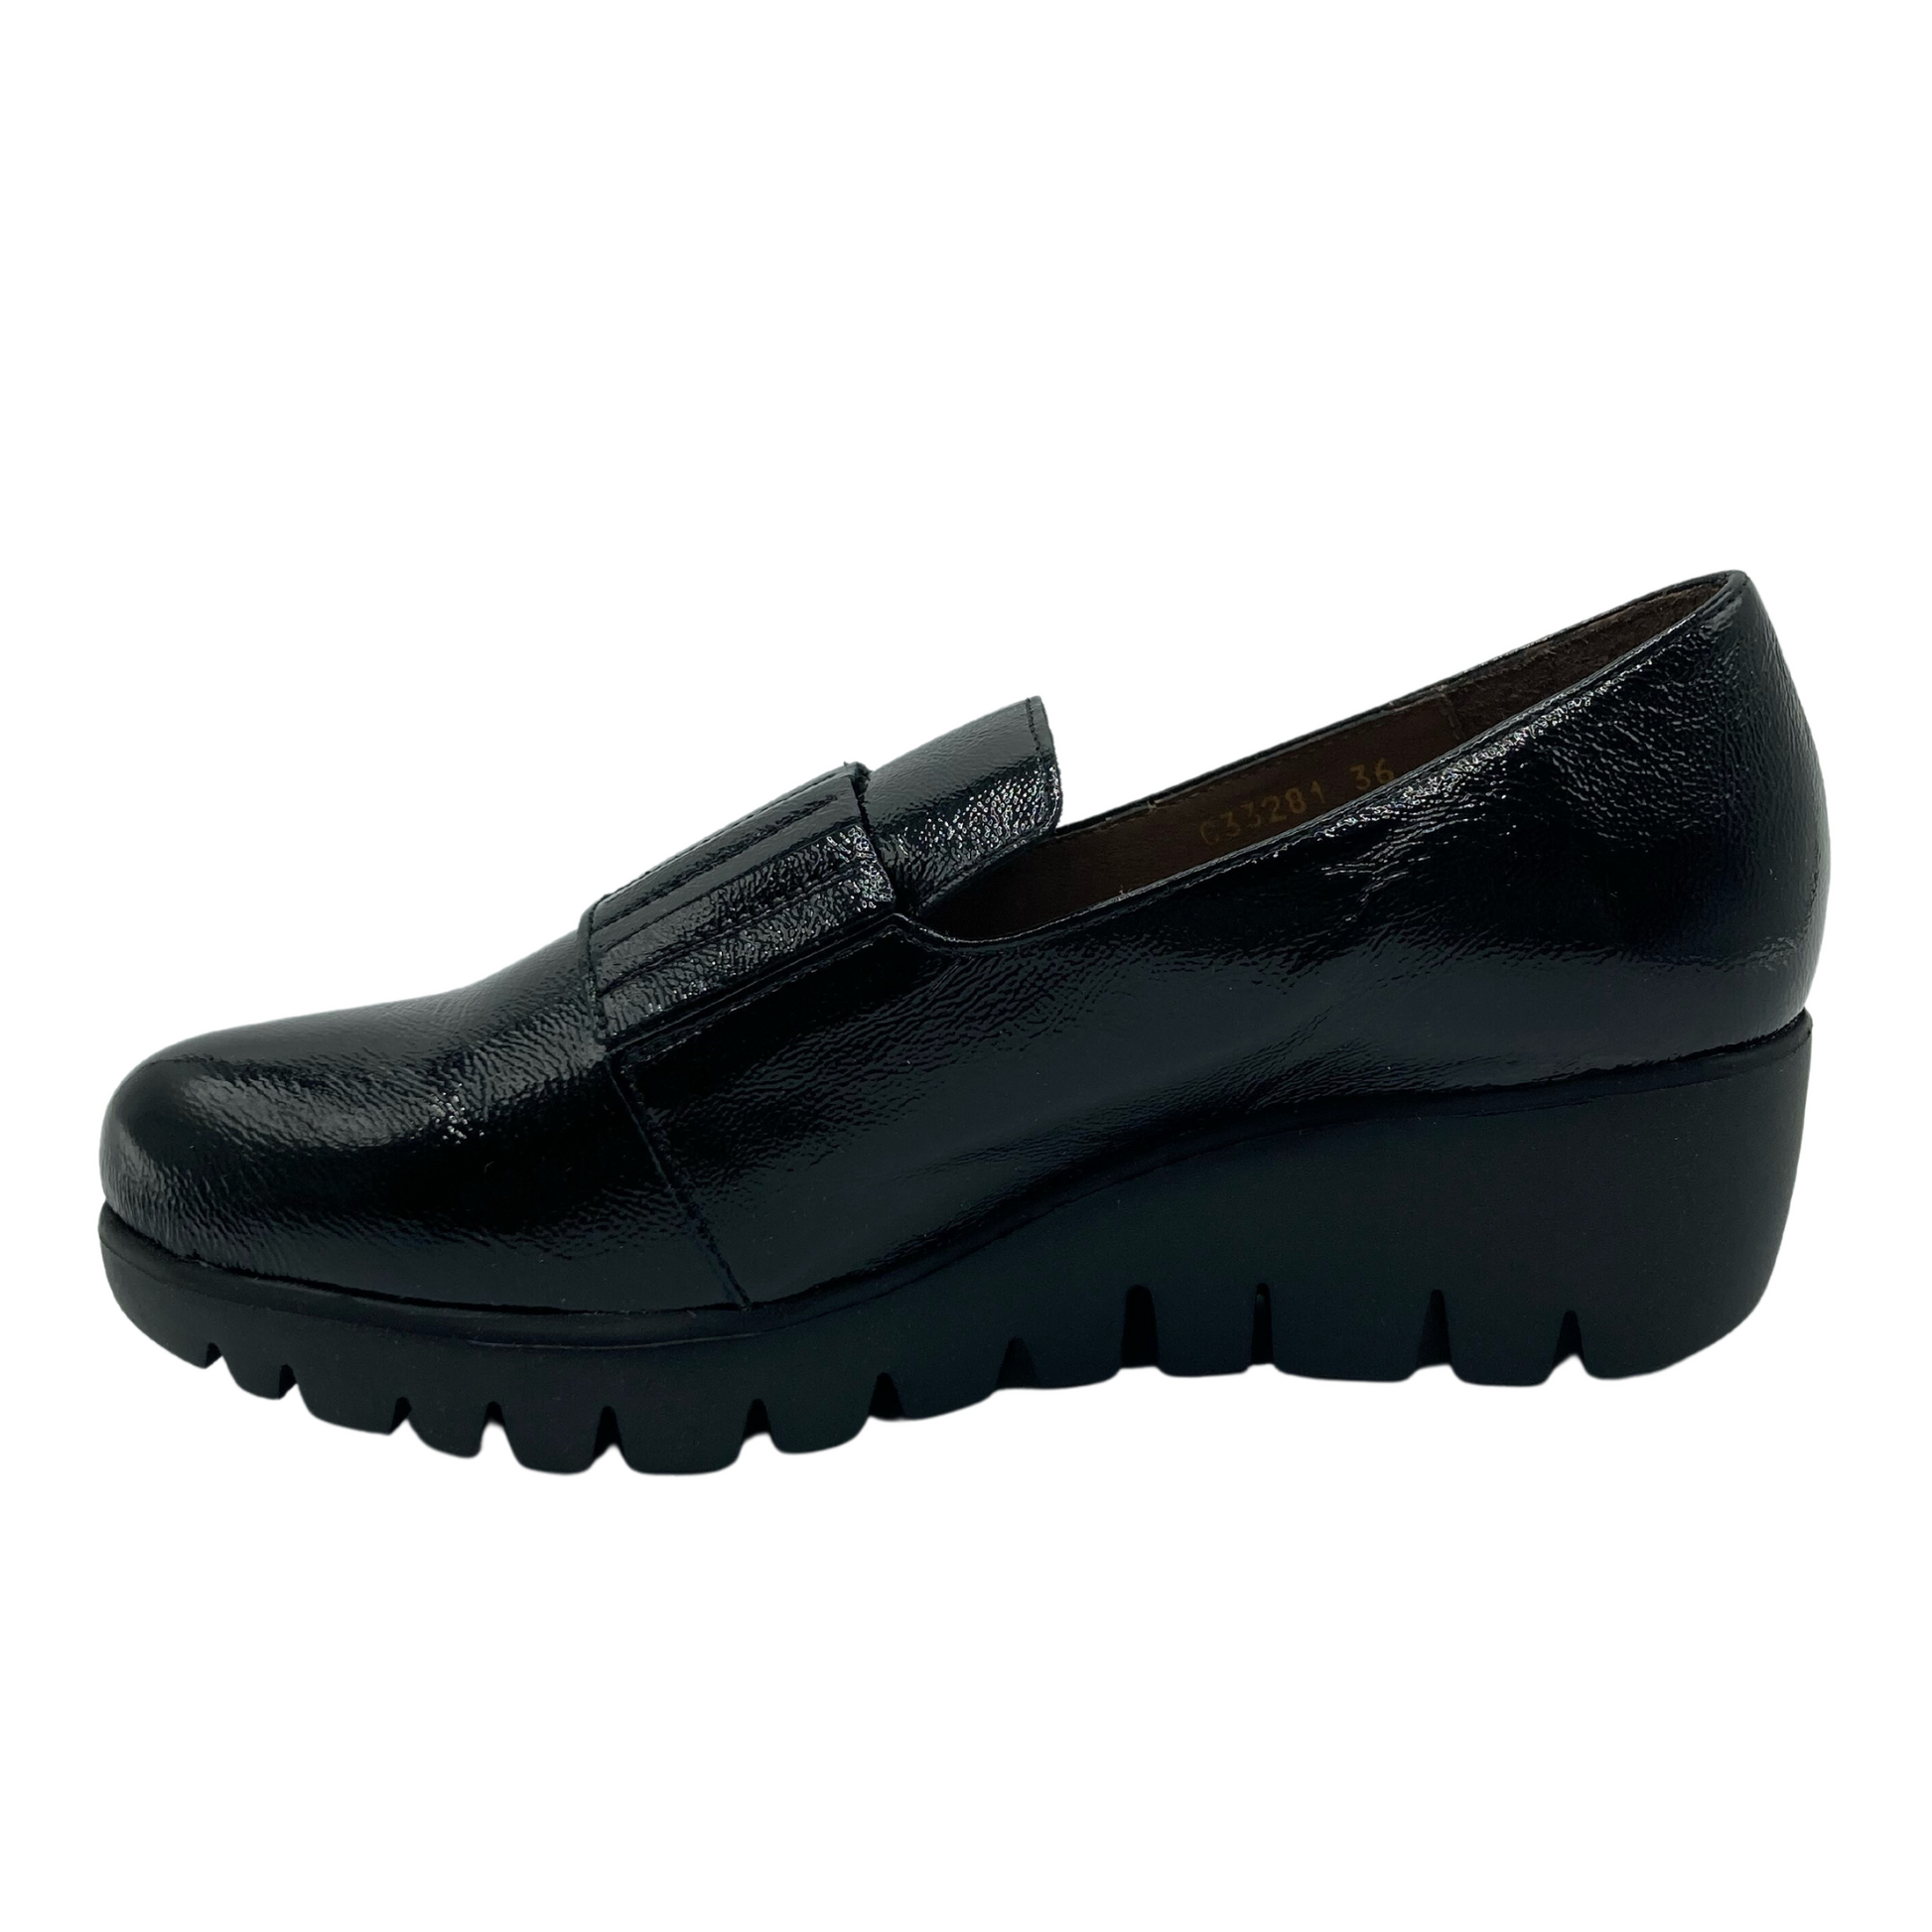 Left facing view of black patent leather shoe